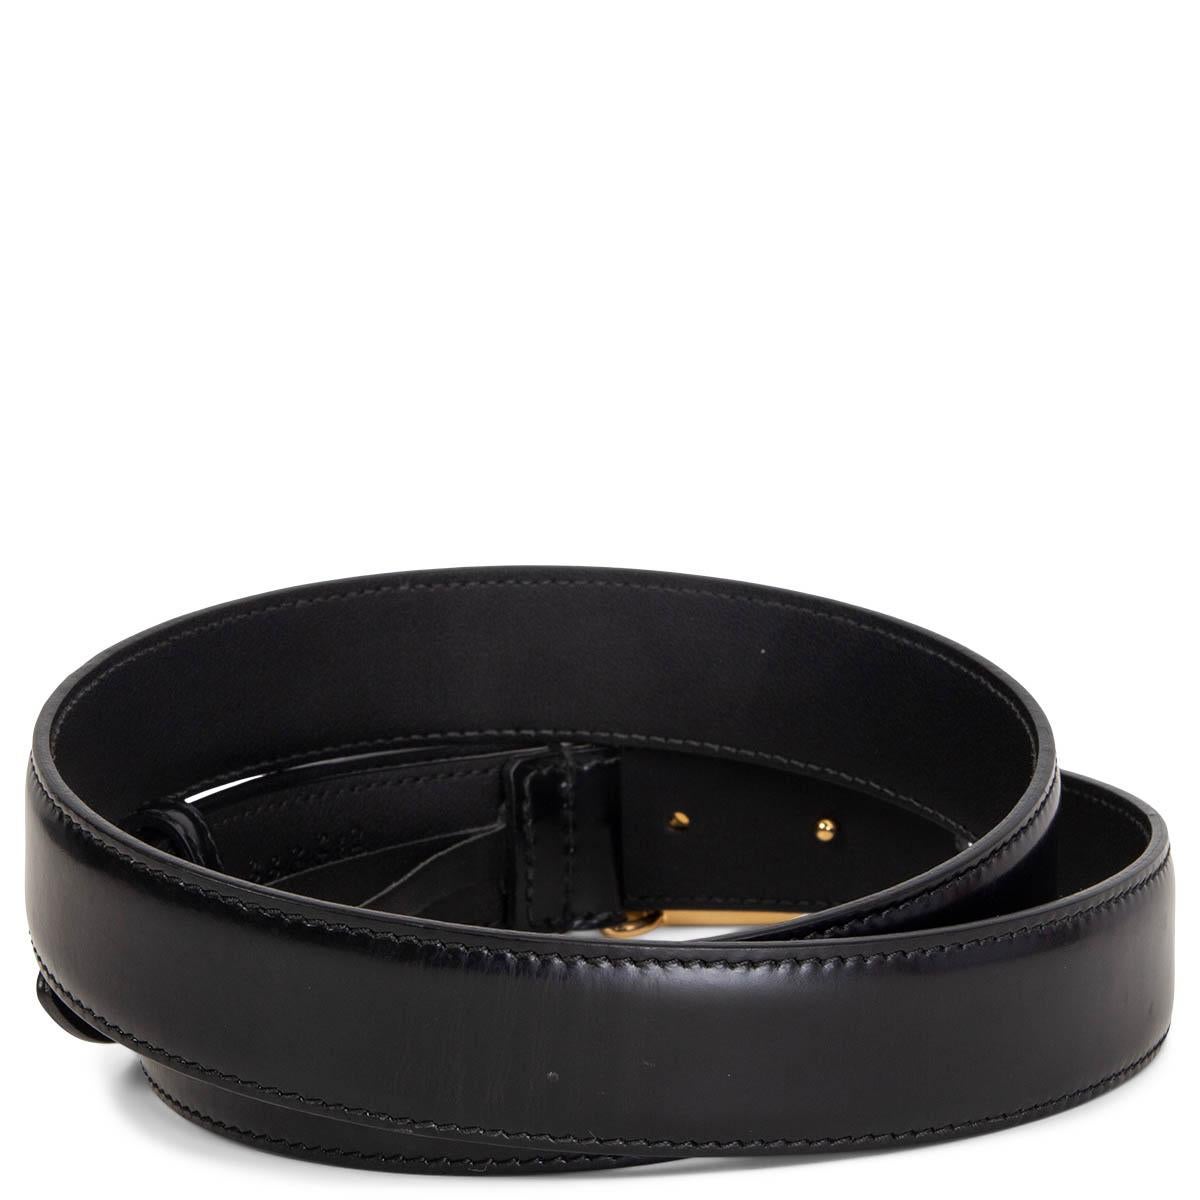 100% authentic Gucci enamel logo belt in black leather (100%). Has been worn and is in excellent condition.

Measurements
Tag Size	90
Size	90cm (35.1in)
Width	3cm (1.2in)
Fits	86cm (33.5in) to 95cm (37.1in)
Length	106cm (41.3in)
Buckle Size